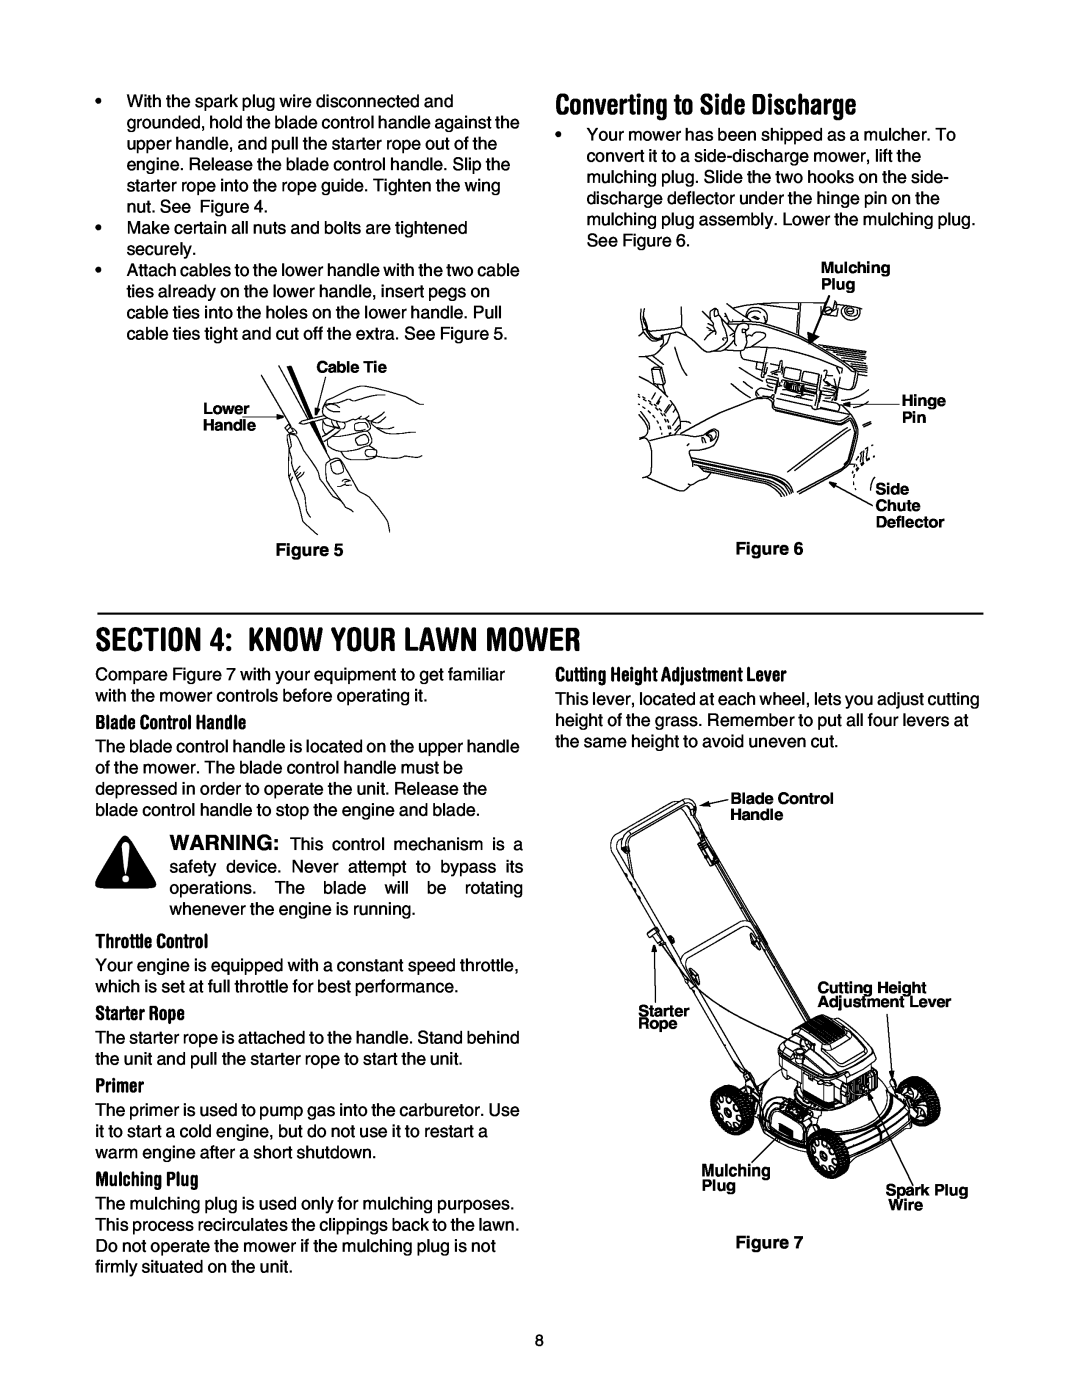 Troy-Bilt 106 Know Your Lawn Mower, Converting to Side Discharge, Blade Control Handle, Throttle Control, Starter Rope 